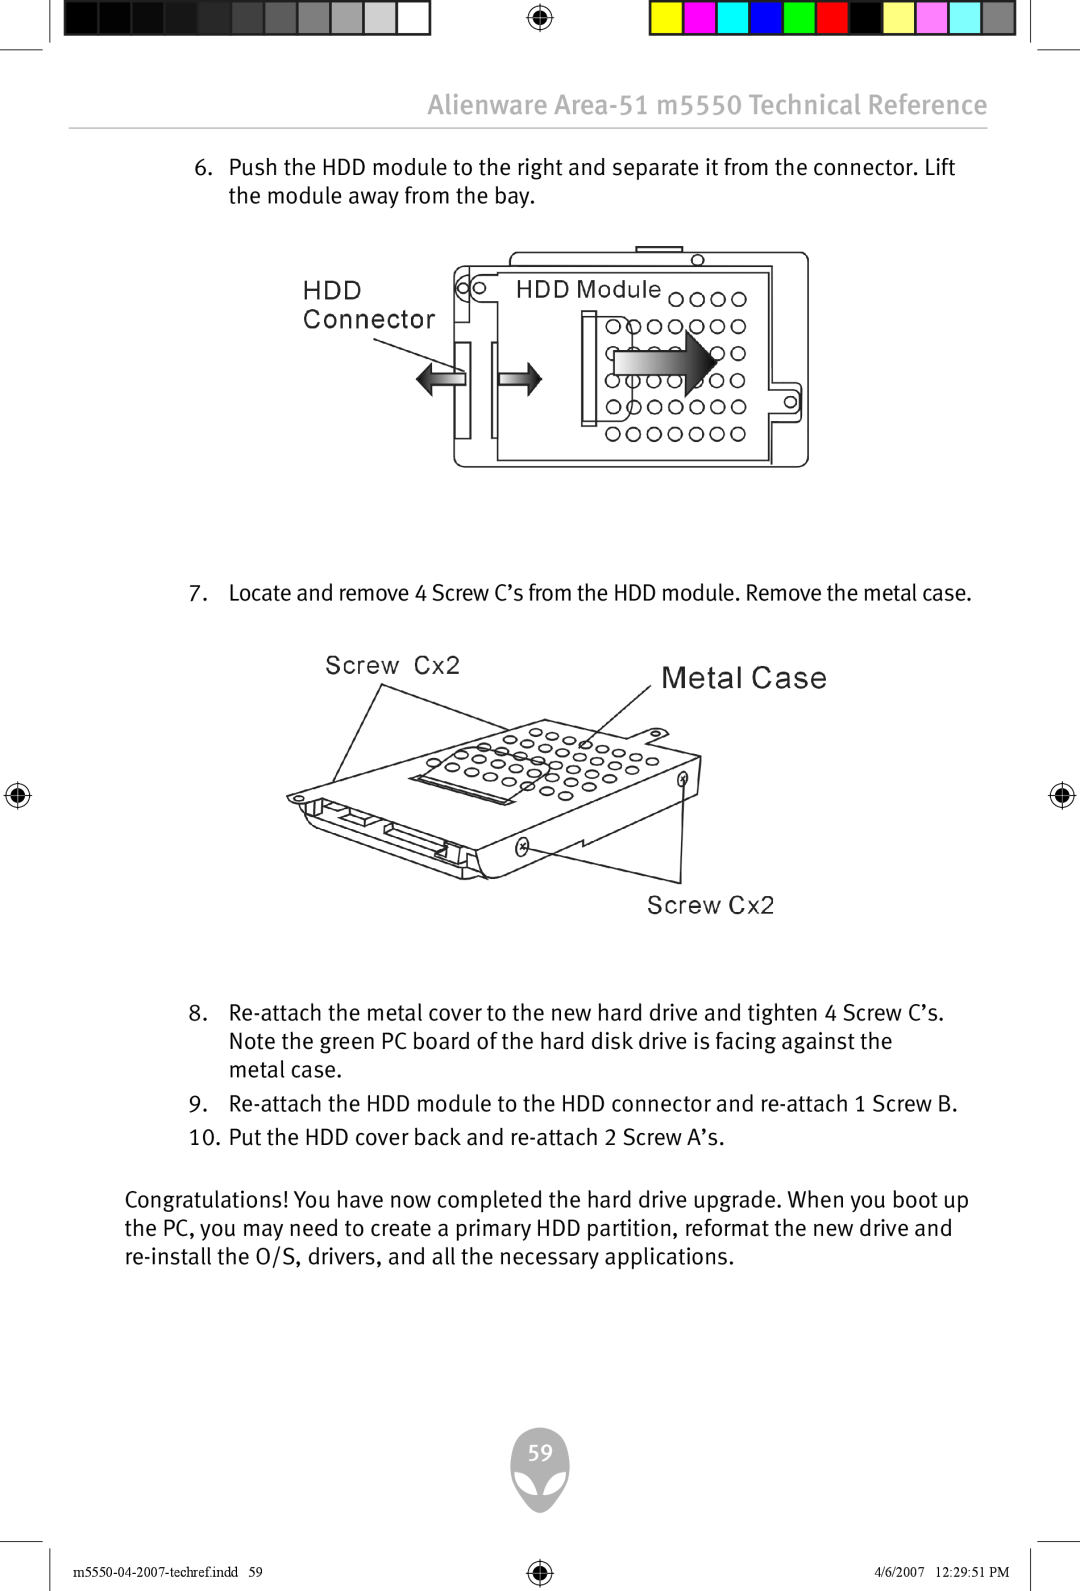 Alienware user manual Alienware Area-51 m5550 Technical Reference, Put the HDD cover back and re-attach 2 Screw A’s 